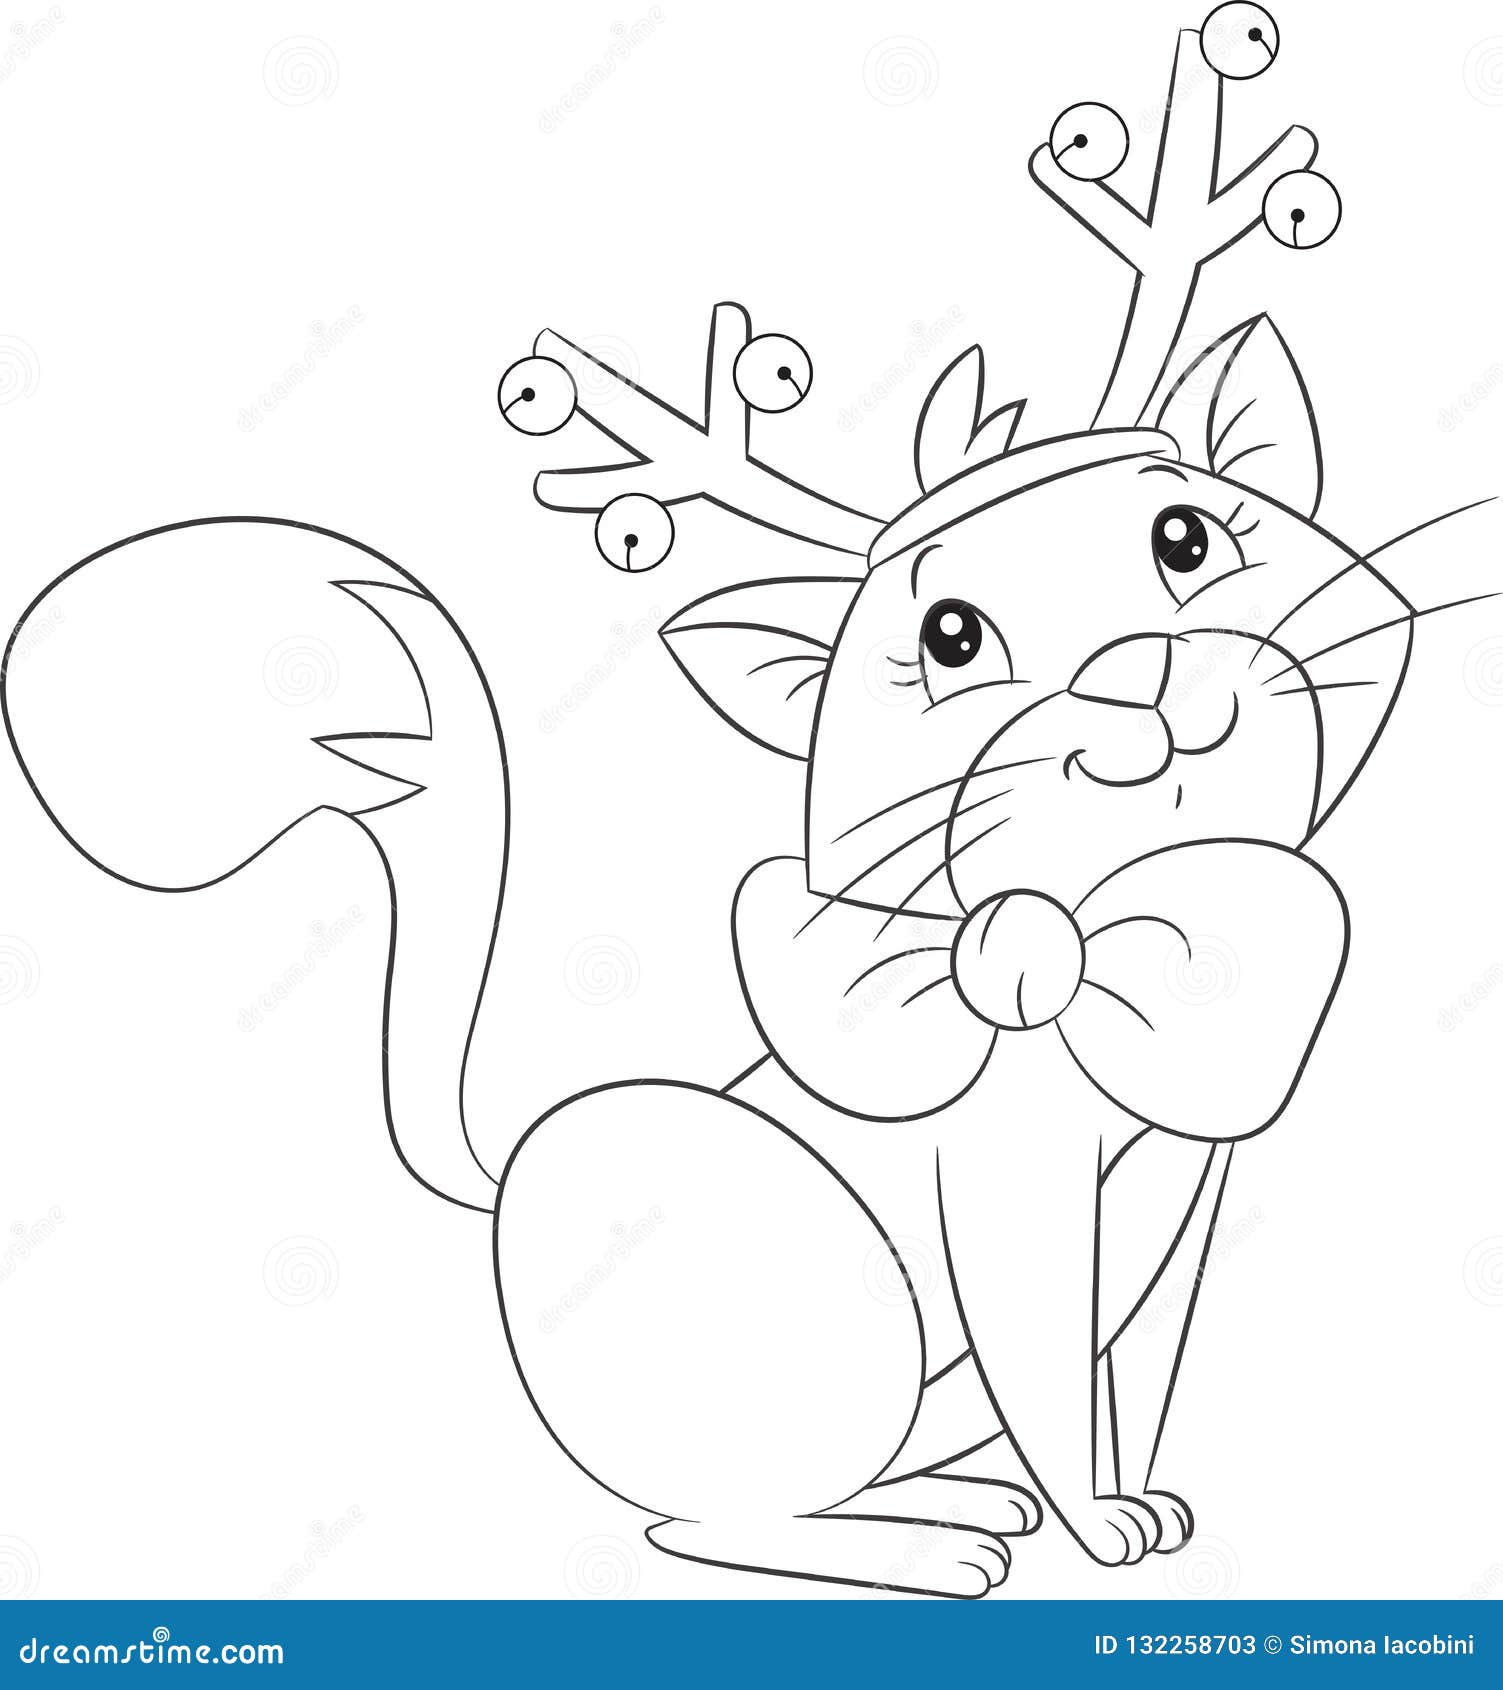 Cute Little Christmas Cat With Reindeer Antlers, For Children`s